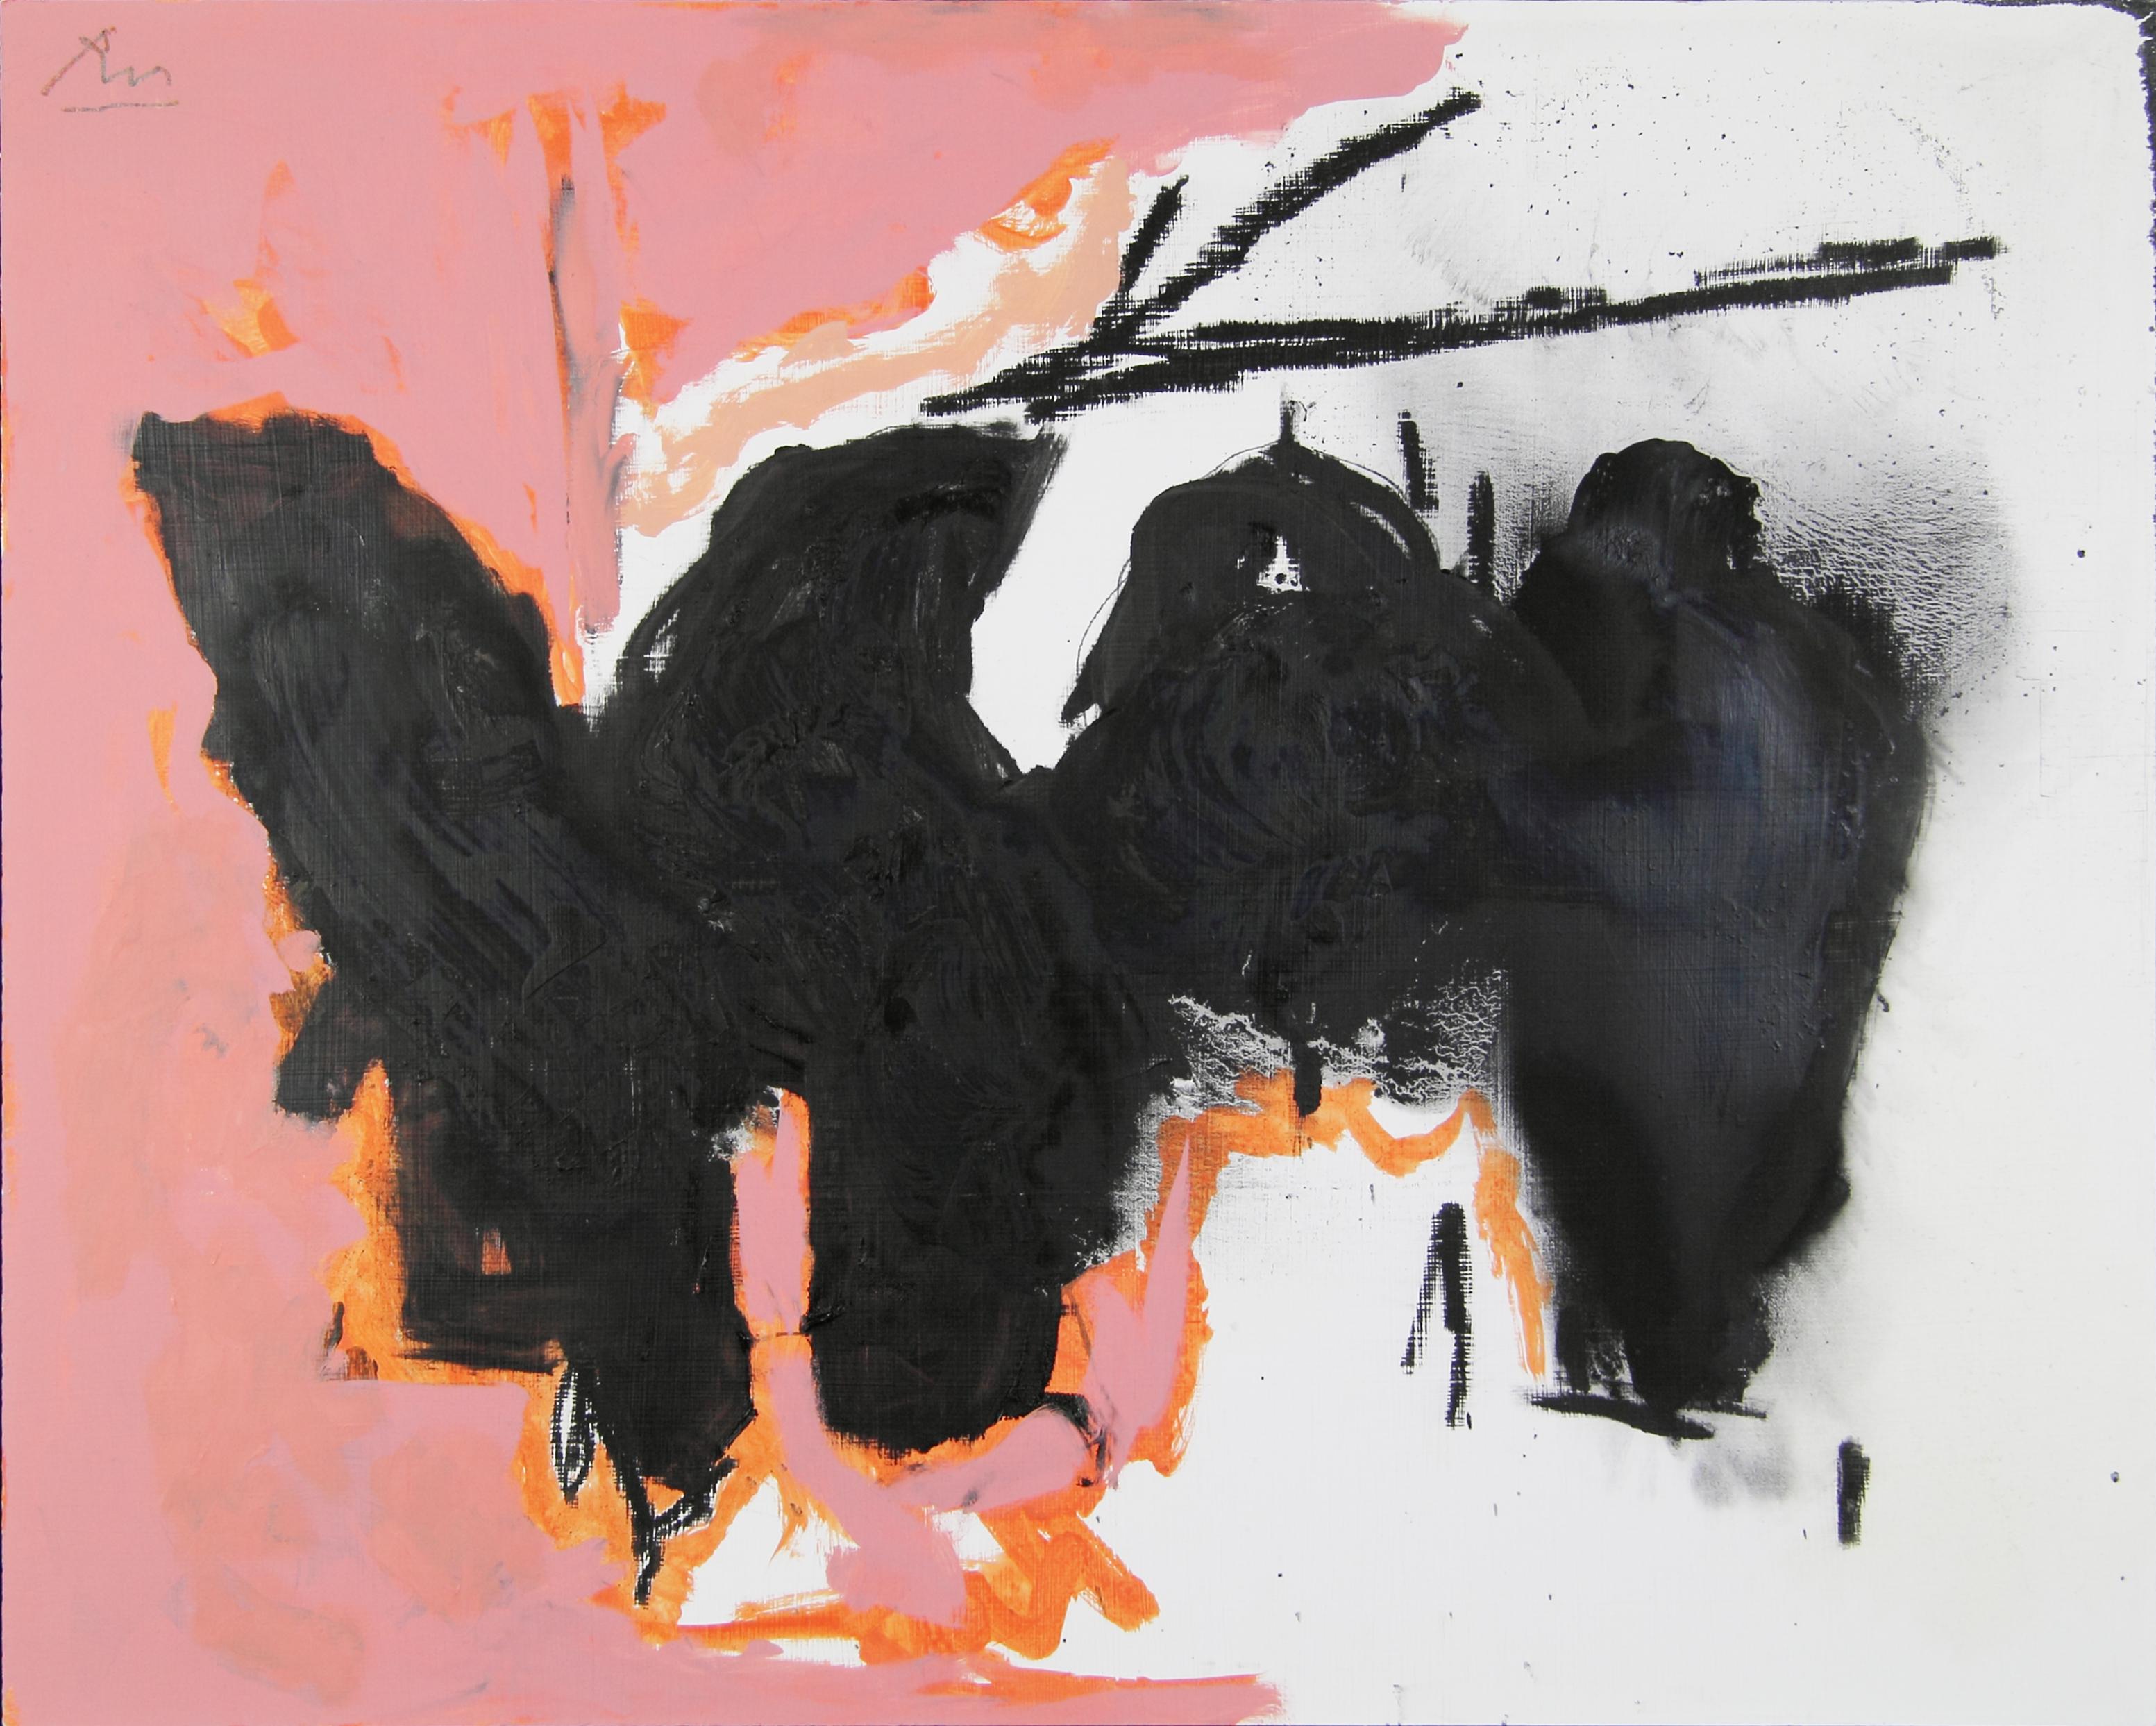 Robert Motherwell Abstract Painting - Elegy to the Spanish Republic No. 163